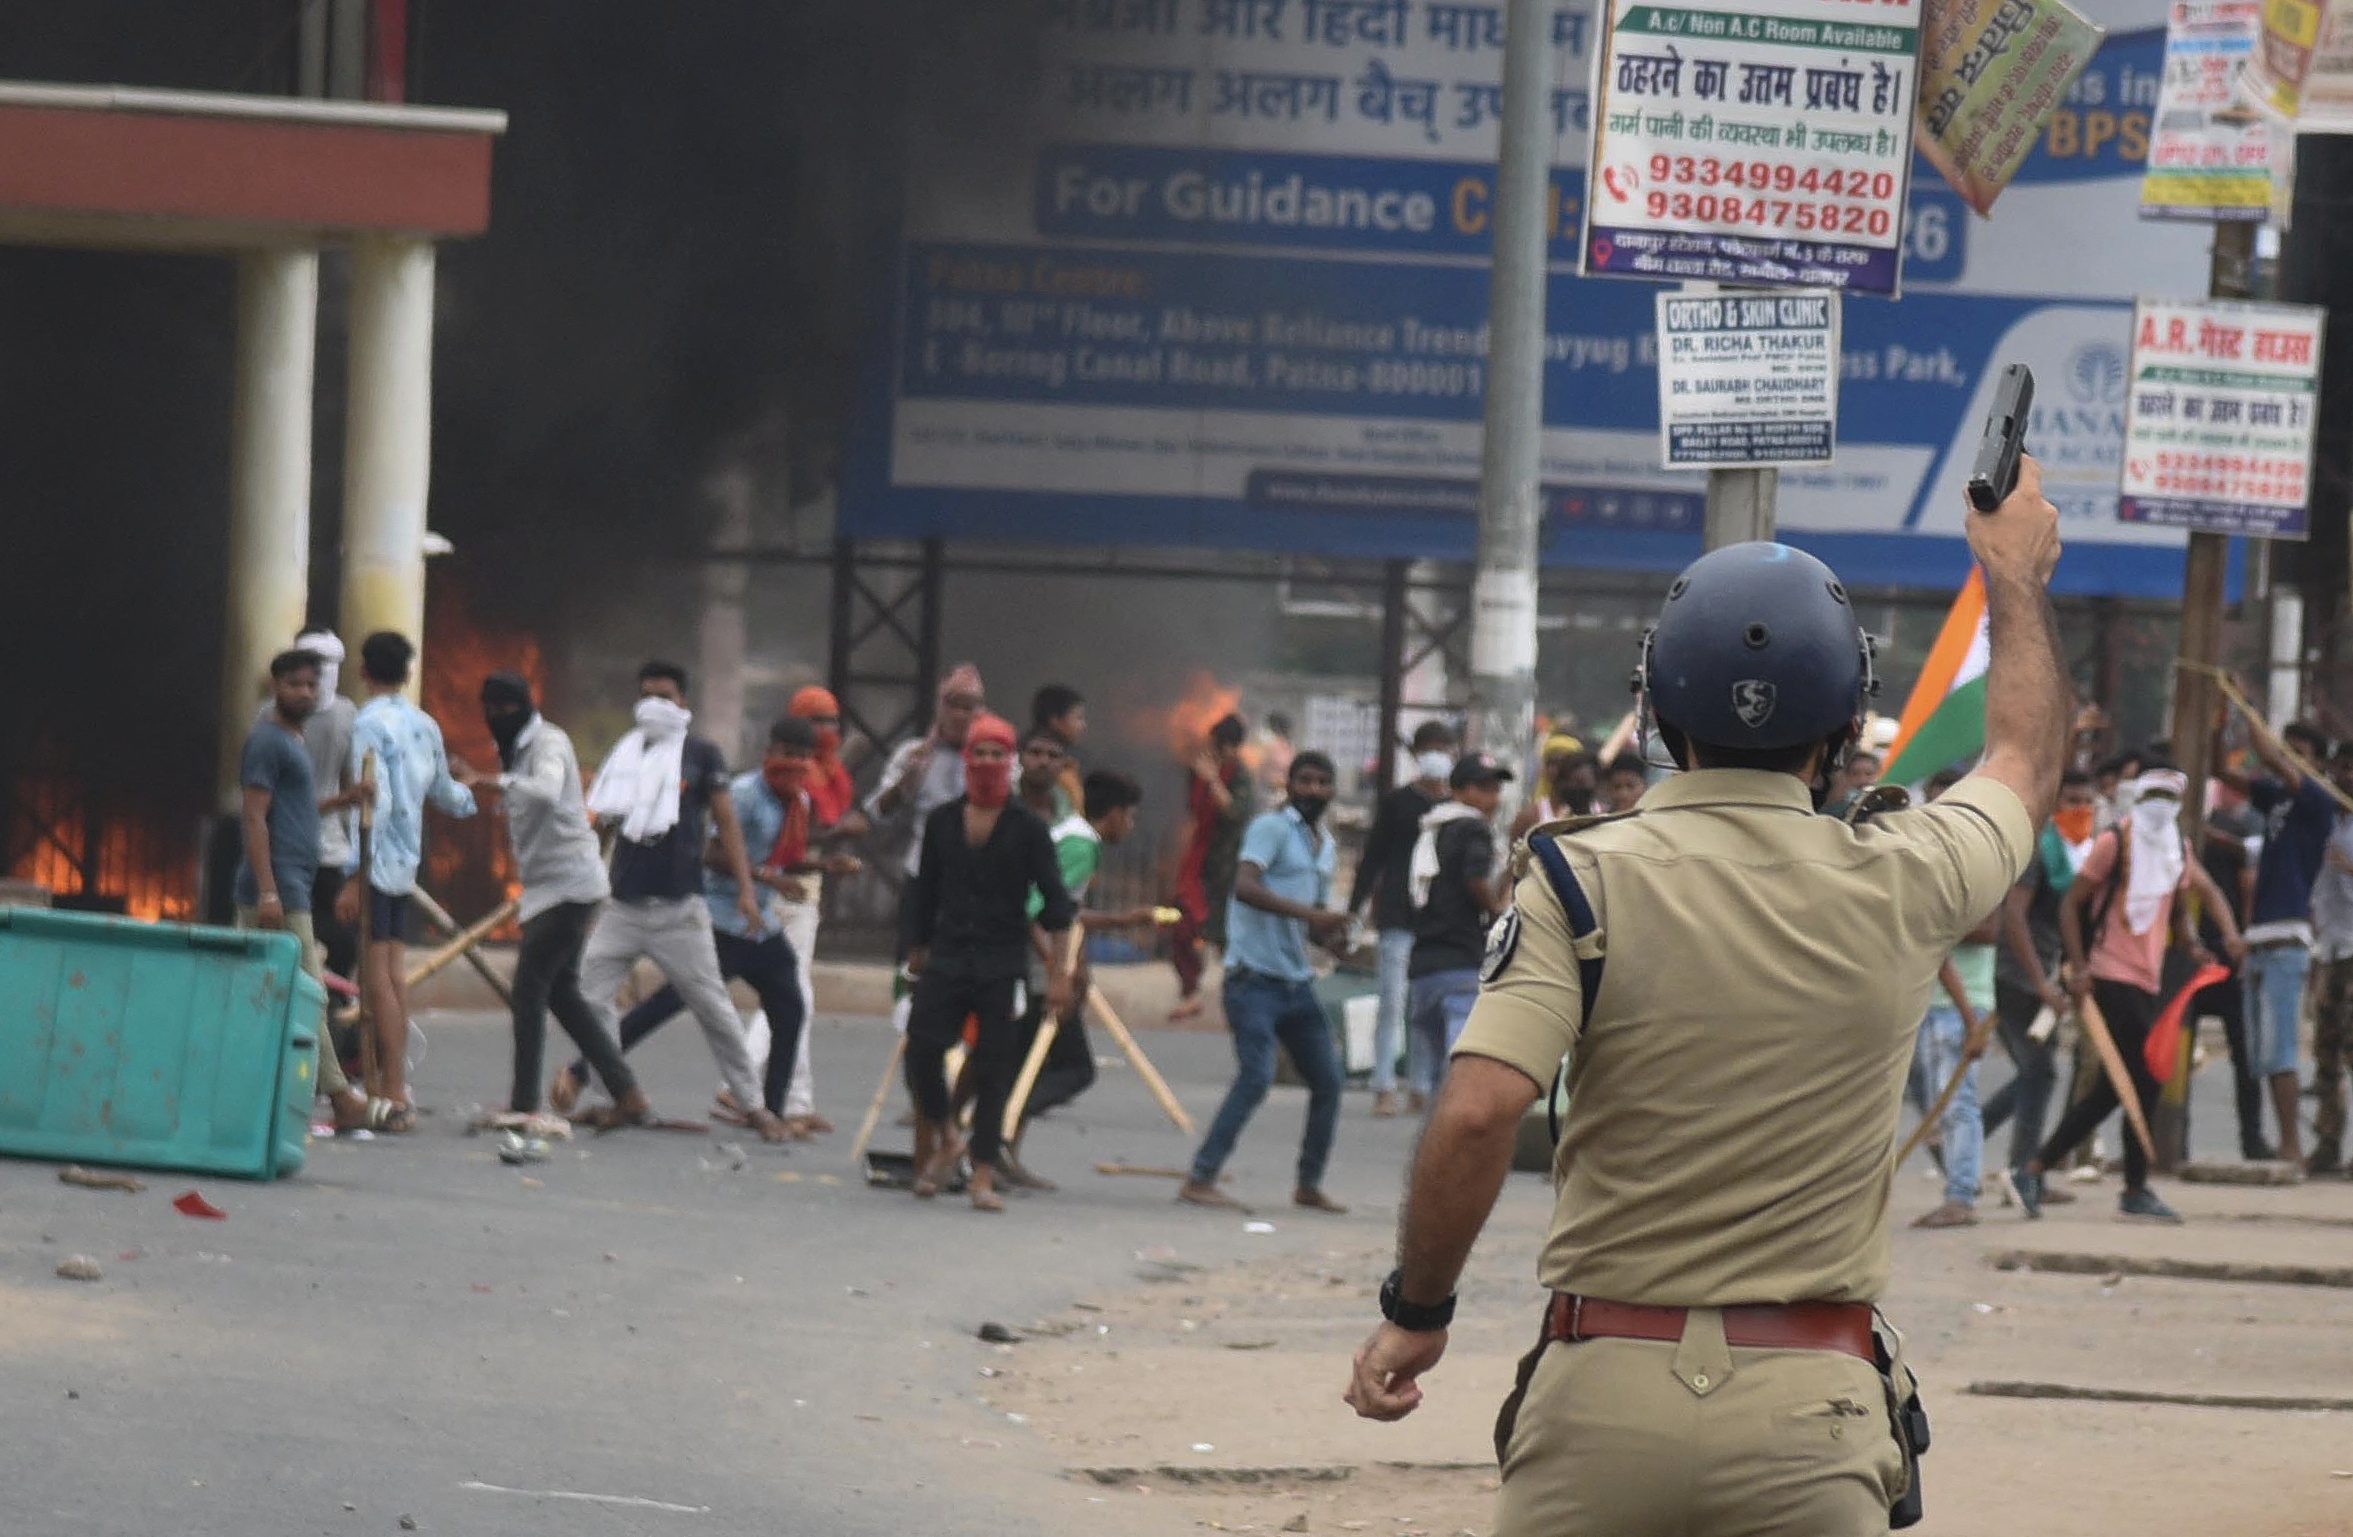 1 dead in India unrest over military hiring, some gatherings banned